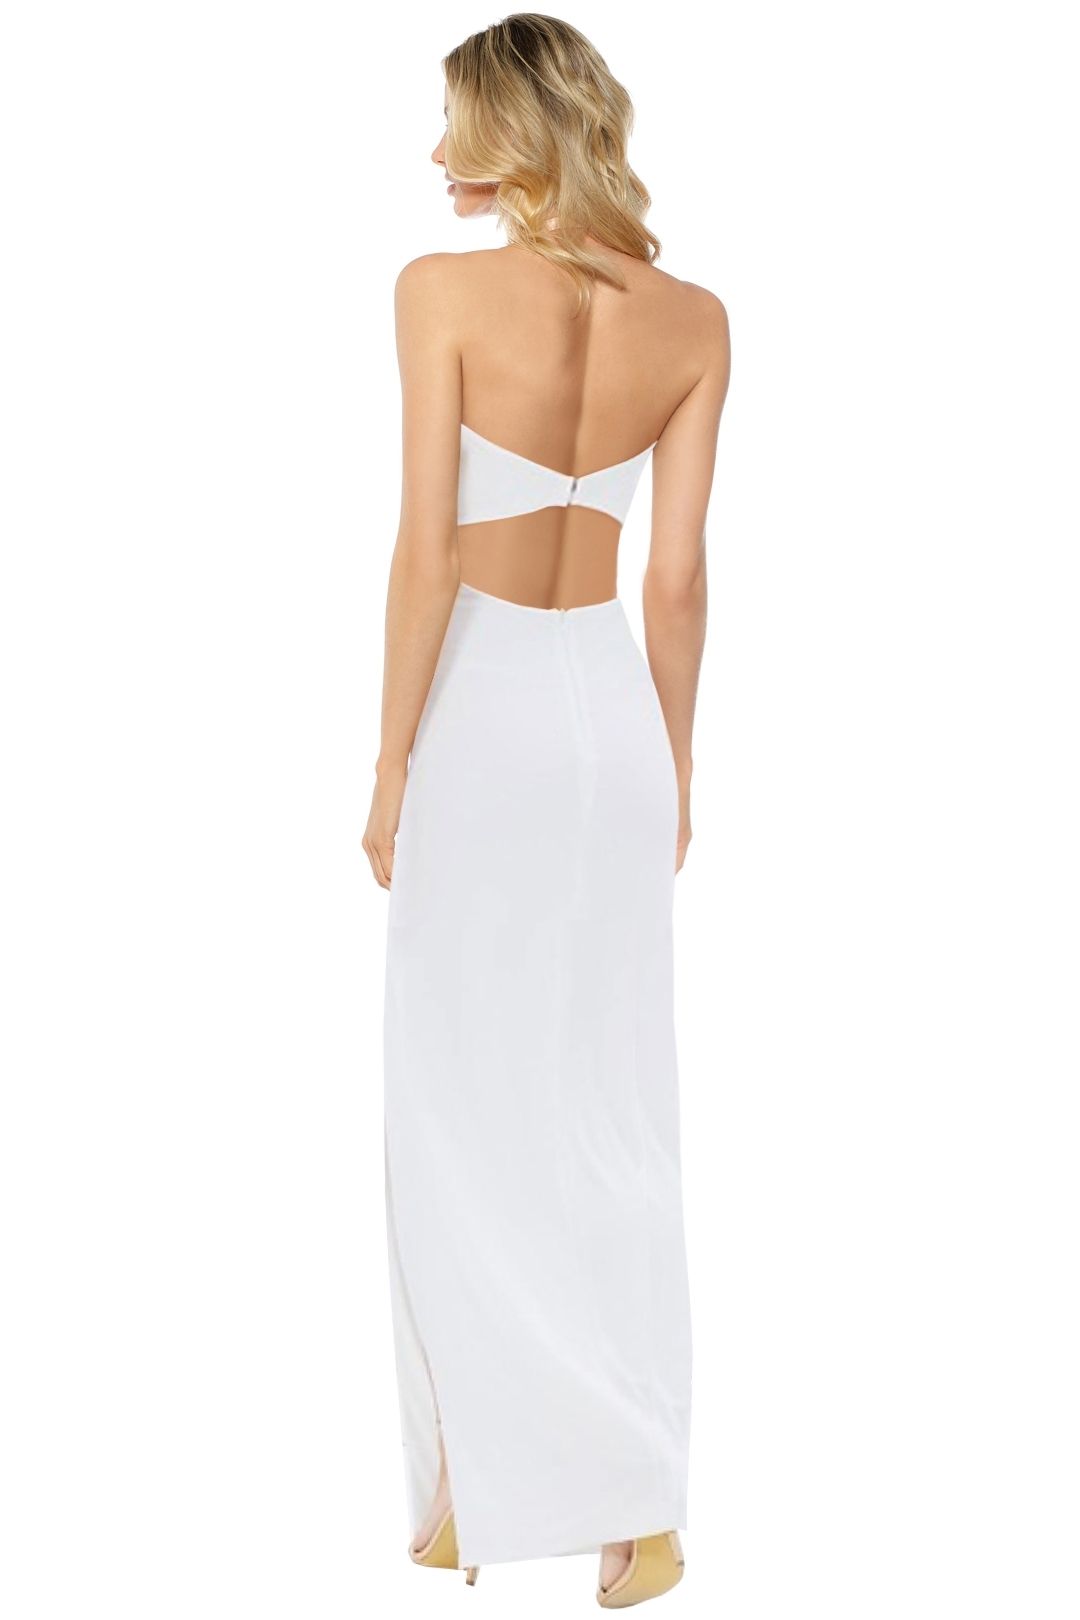 Strapless Evening Dress in White by SKIVA for Hire